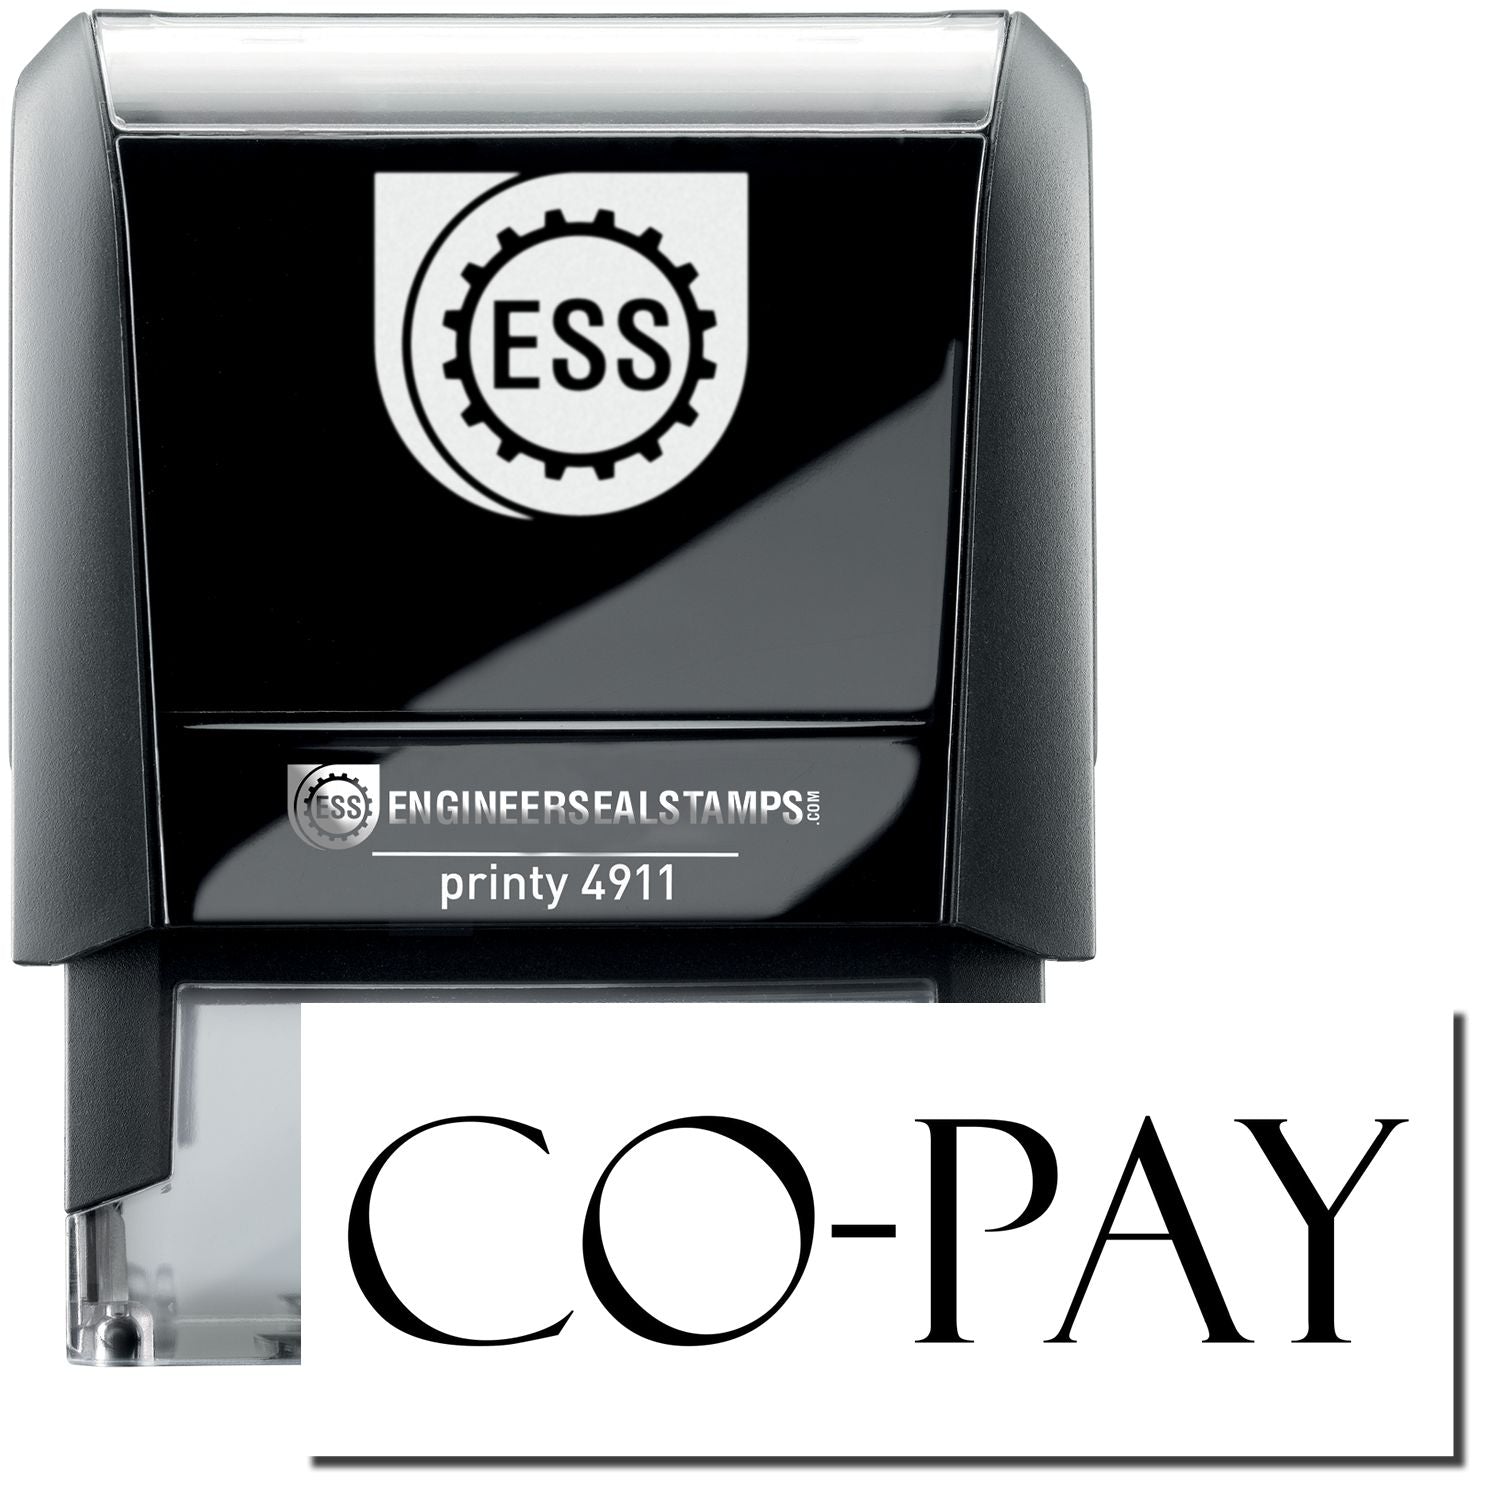 A self-inking stamp with a stamped image showing how the text "CO-PAY" is displayed after stamping.